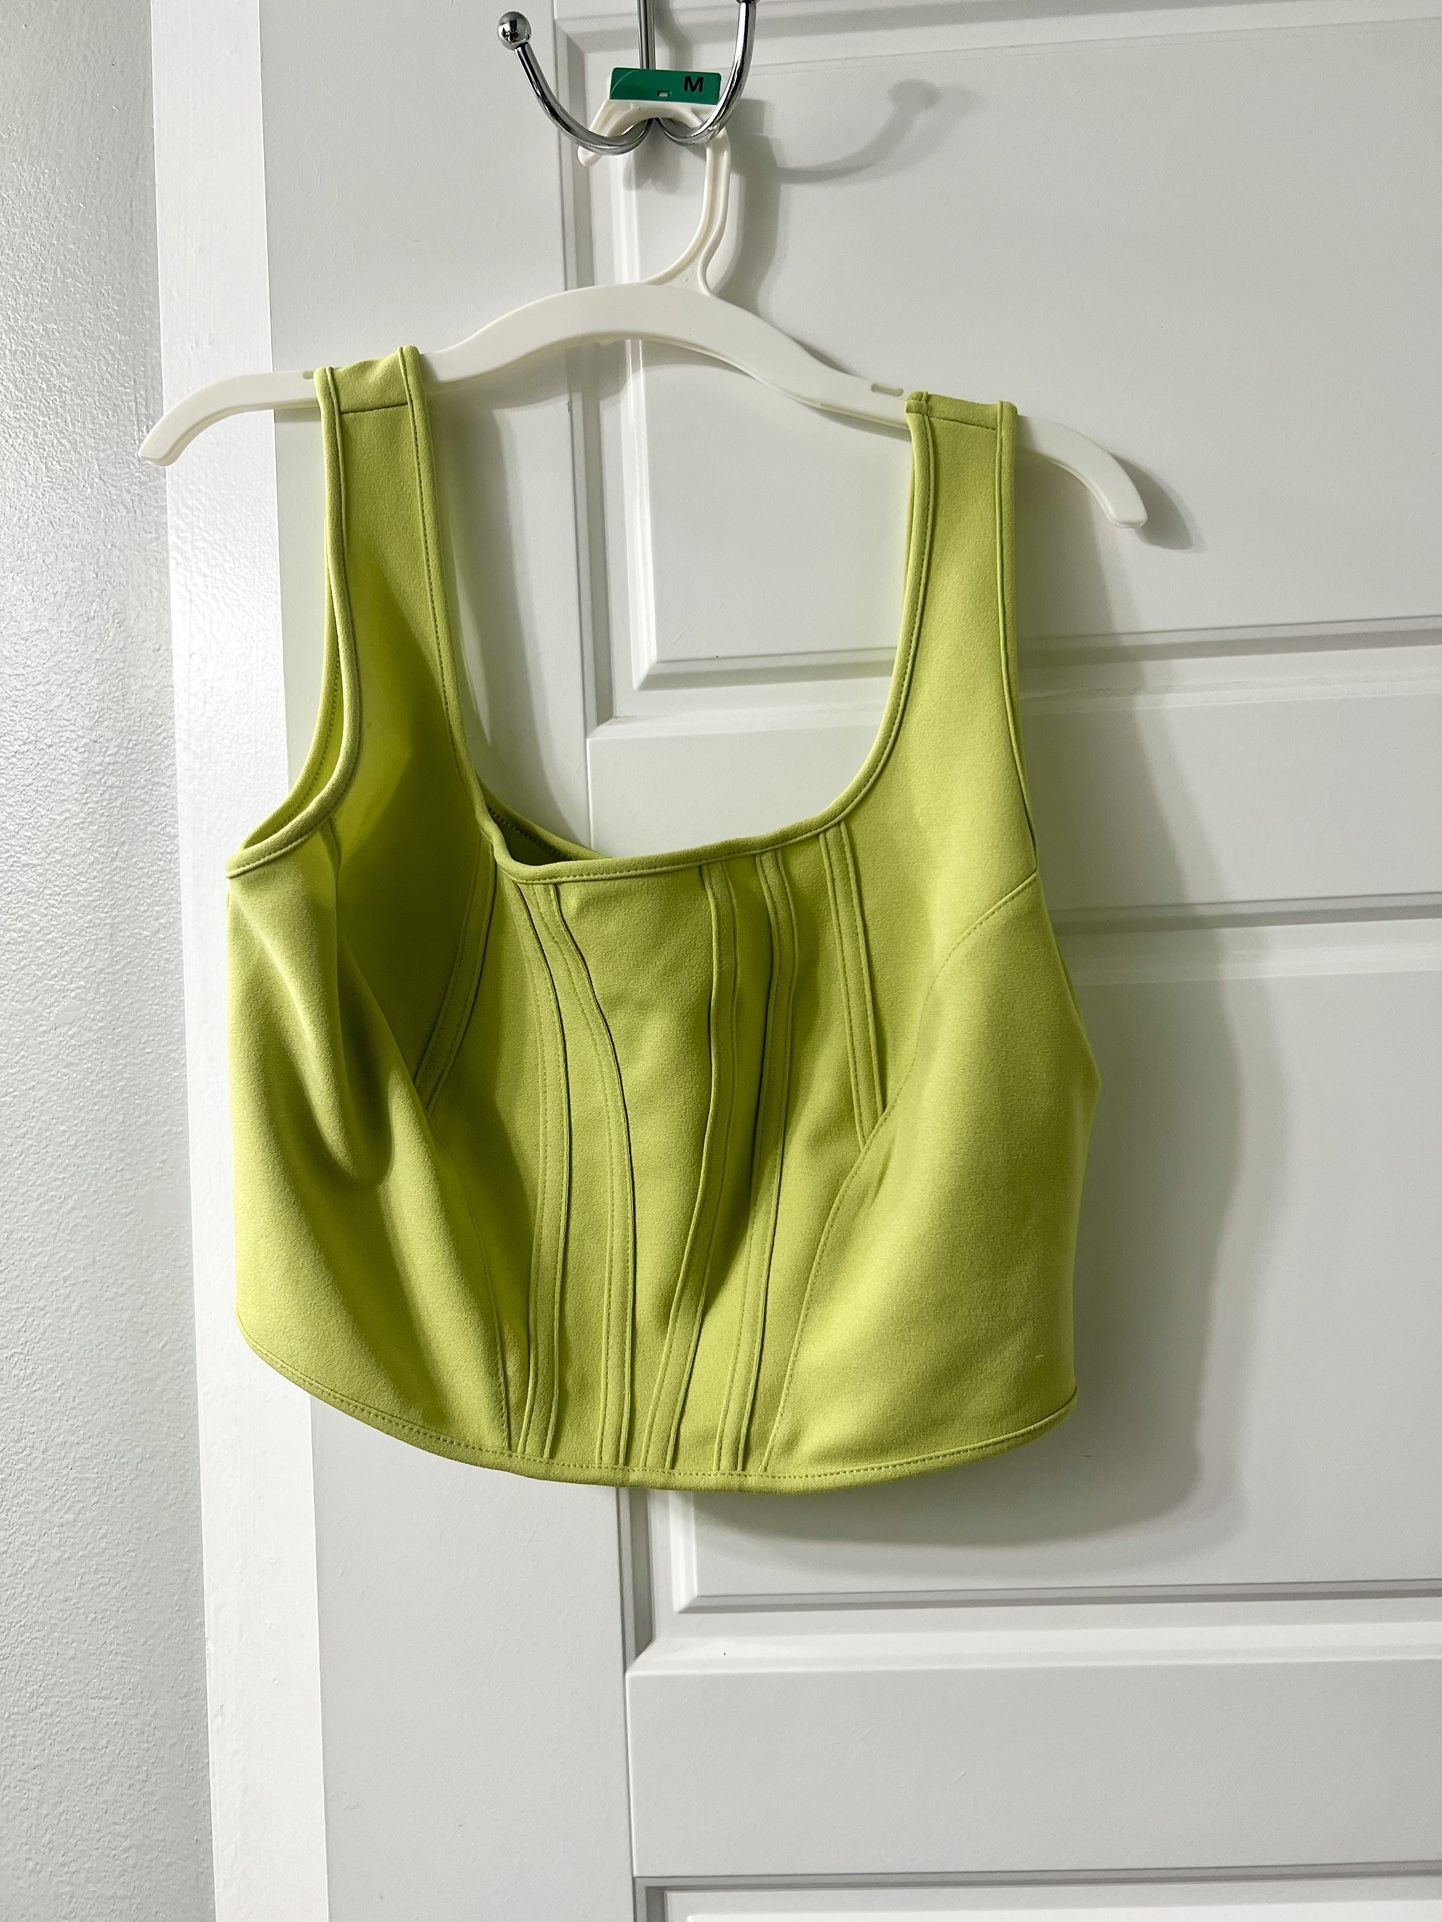 Green corset tank top size small NWOT by happily grey 